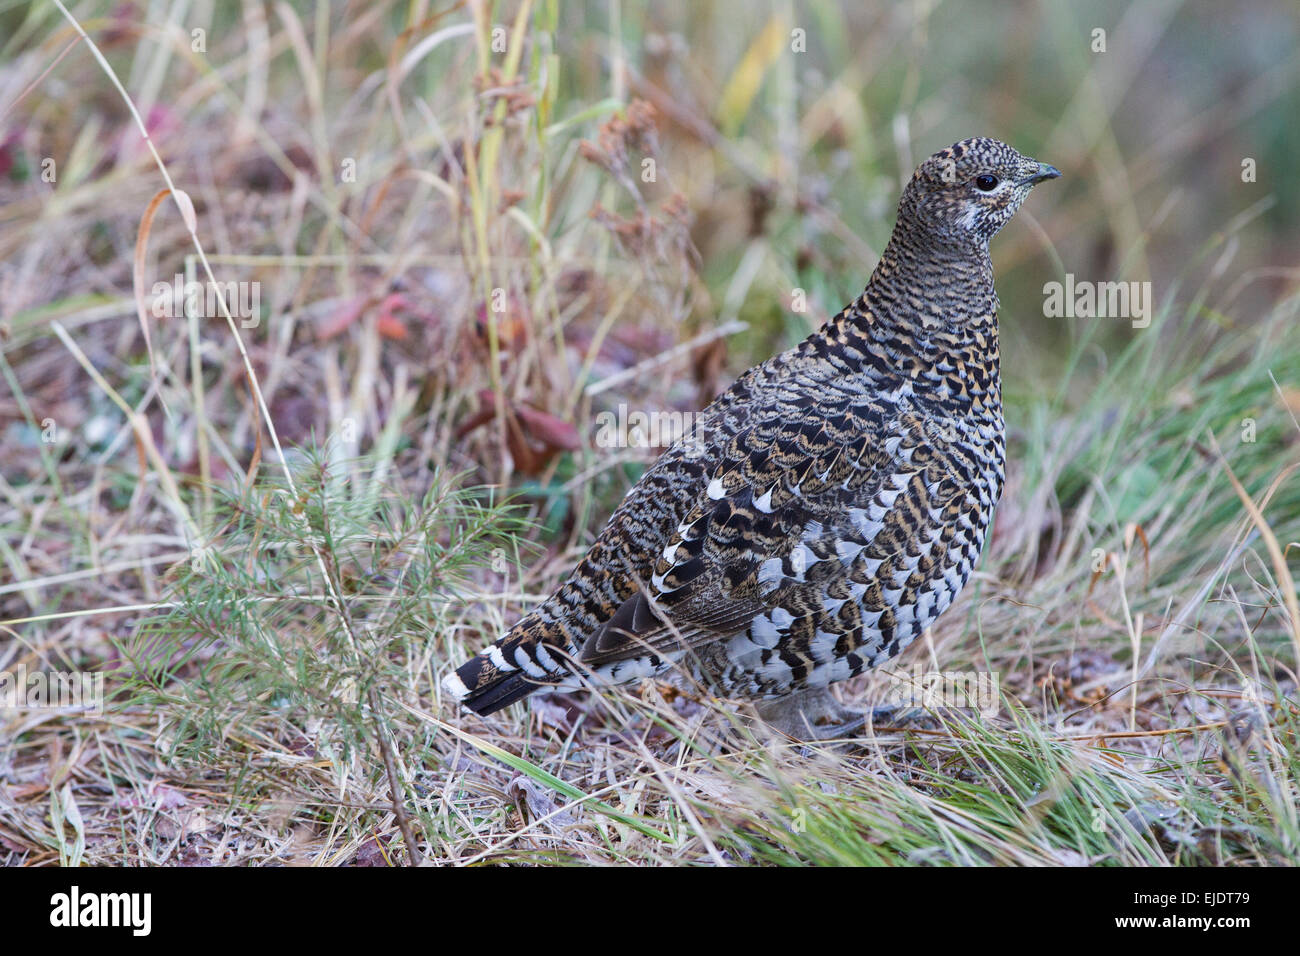 A Sharptail Grouse in the John Long Mountains of Montana. Stock Photo